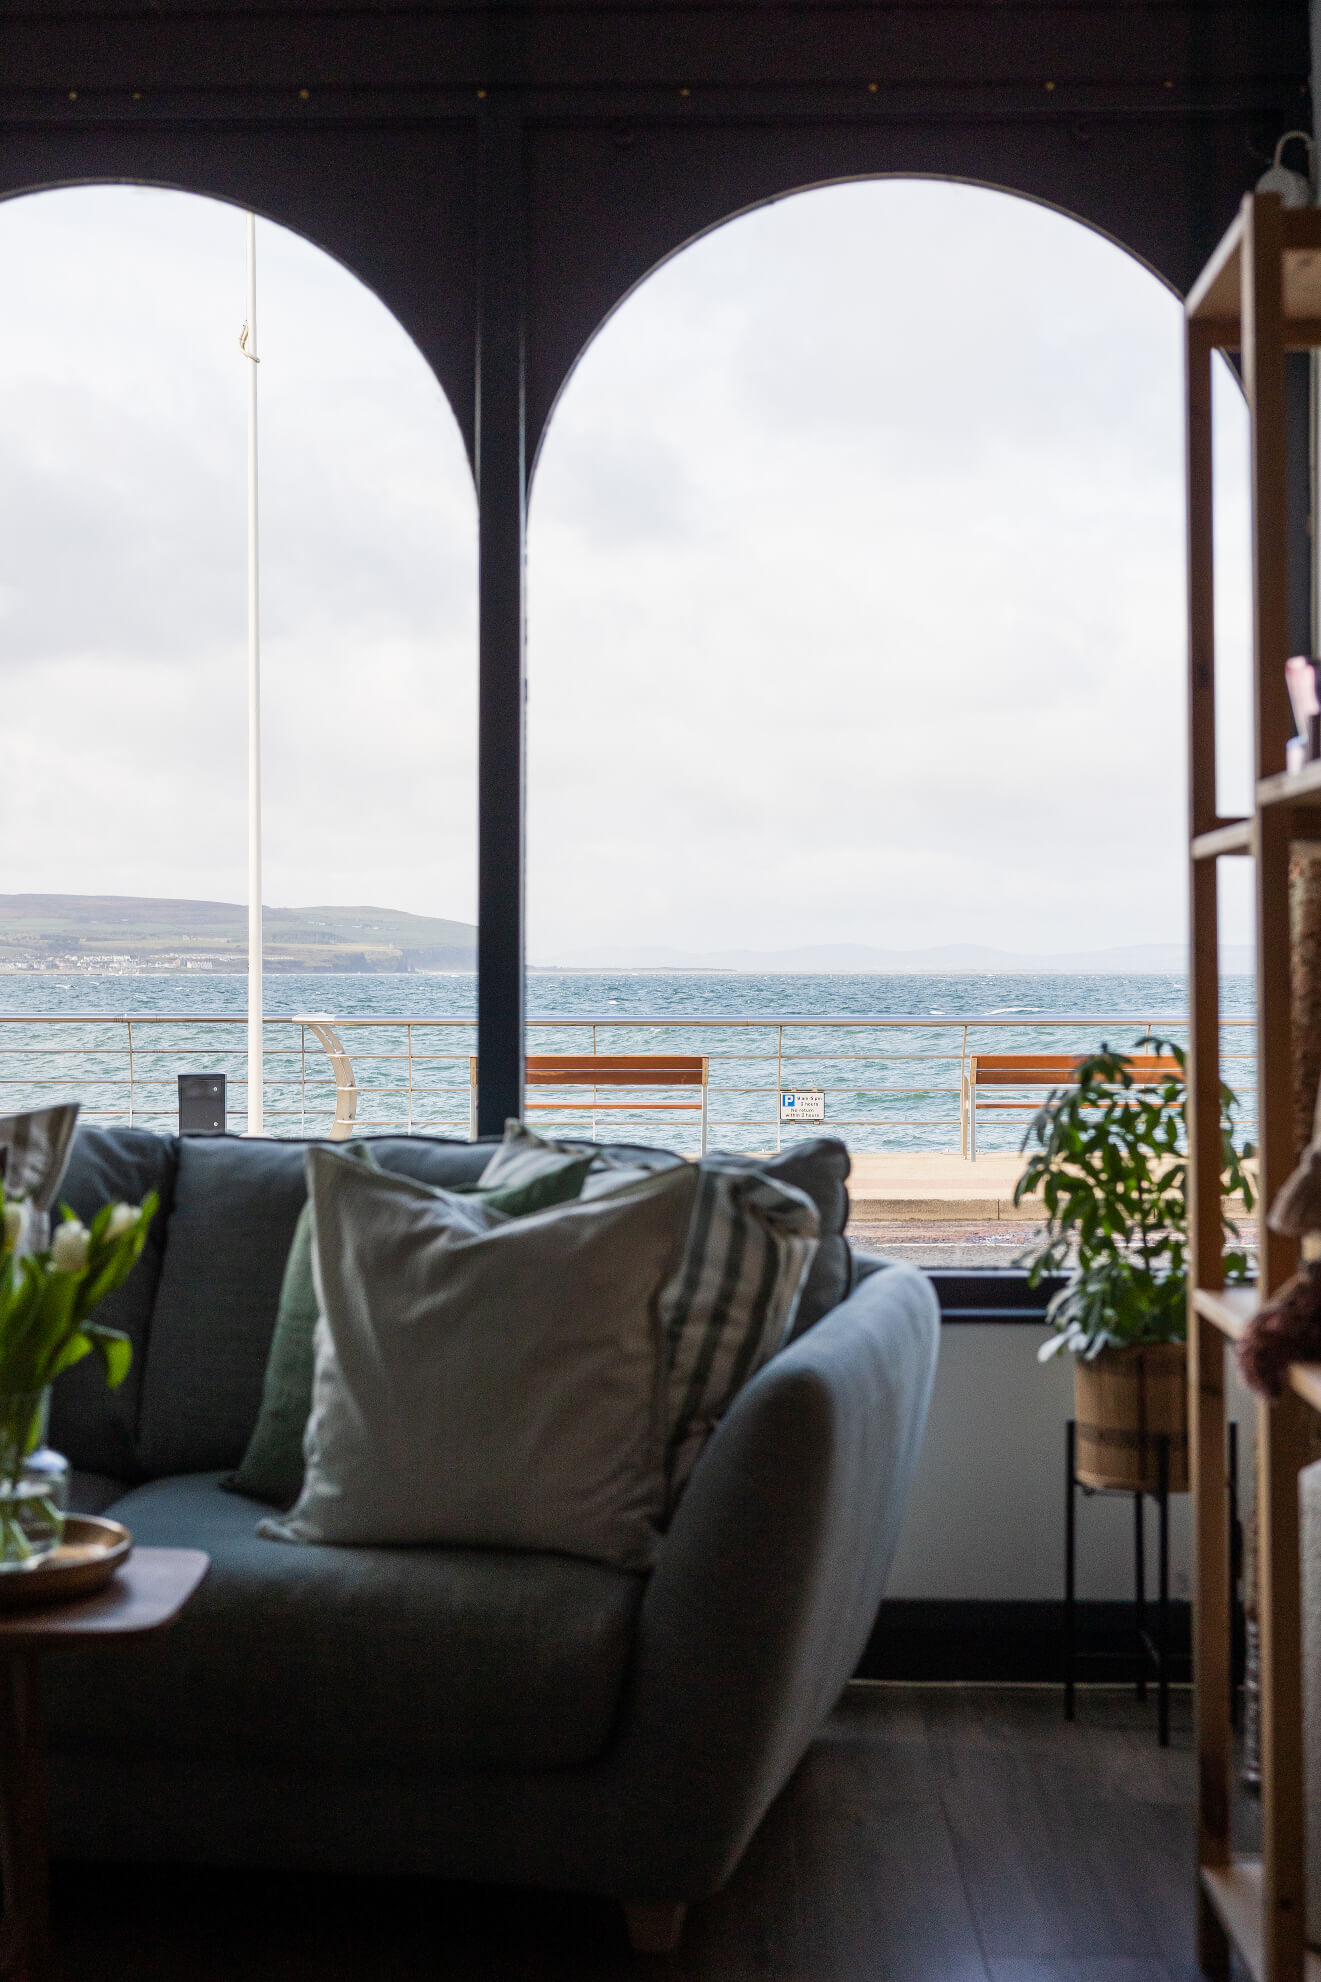 The view of the sea from inside Portstewart homewares store A Broader Picture